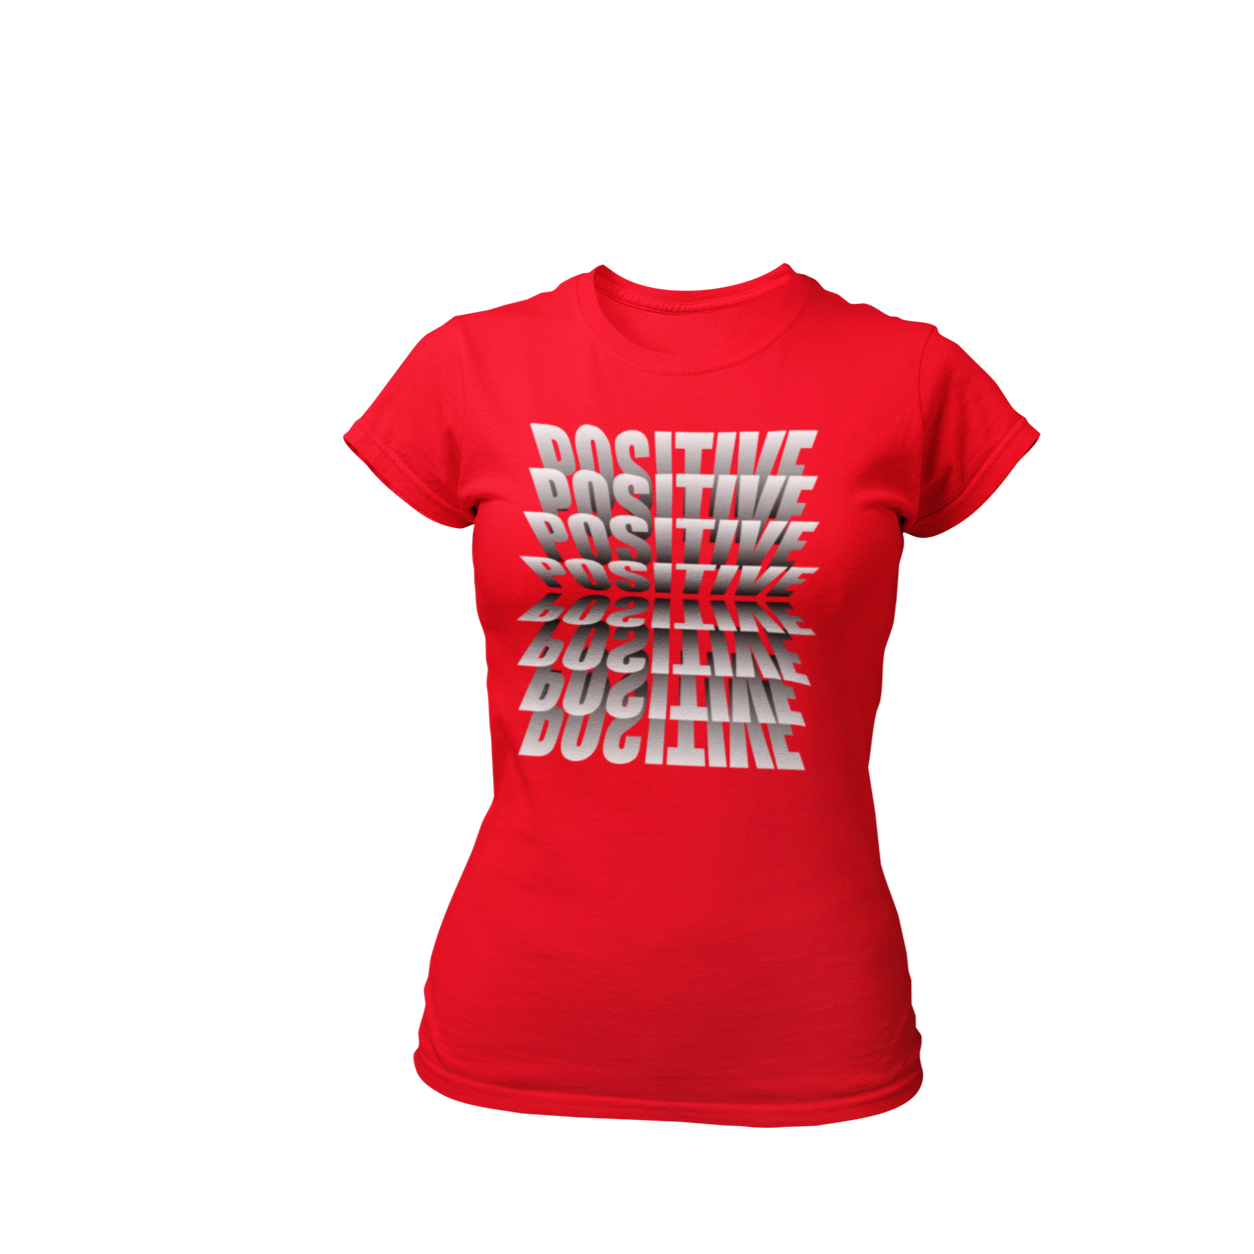 Red positive t-shirt by Made Inc